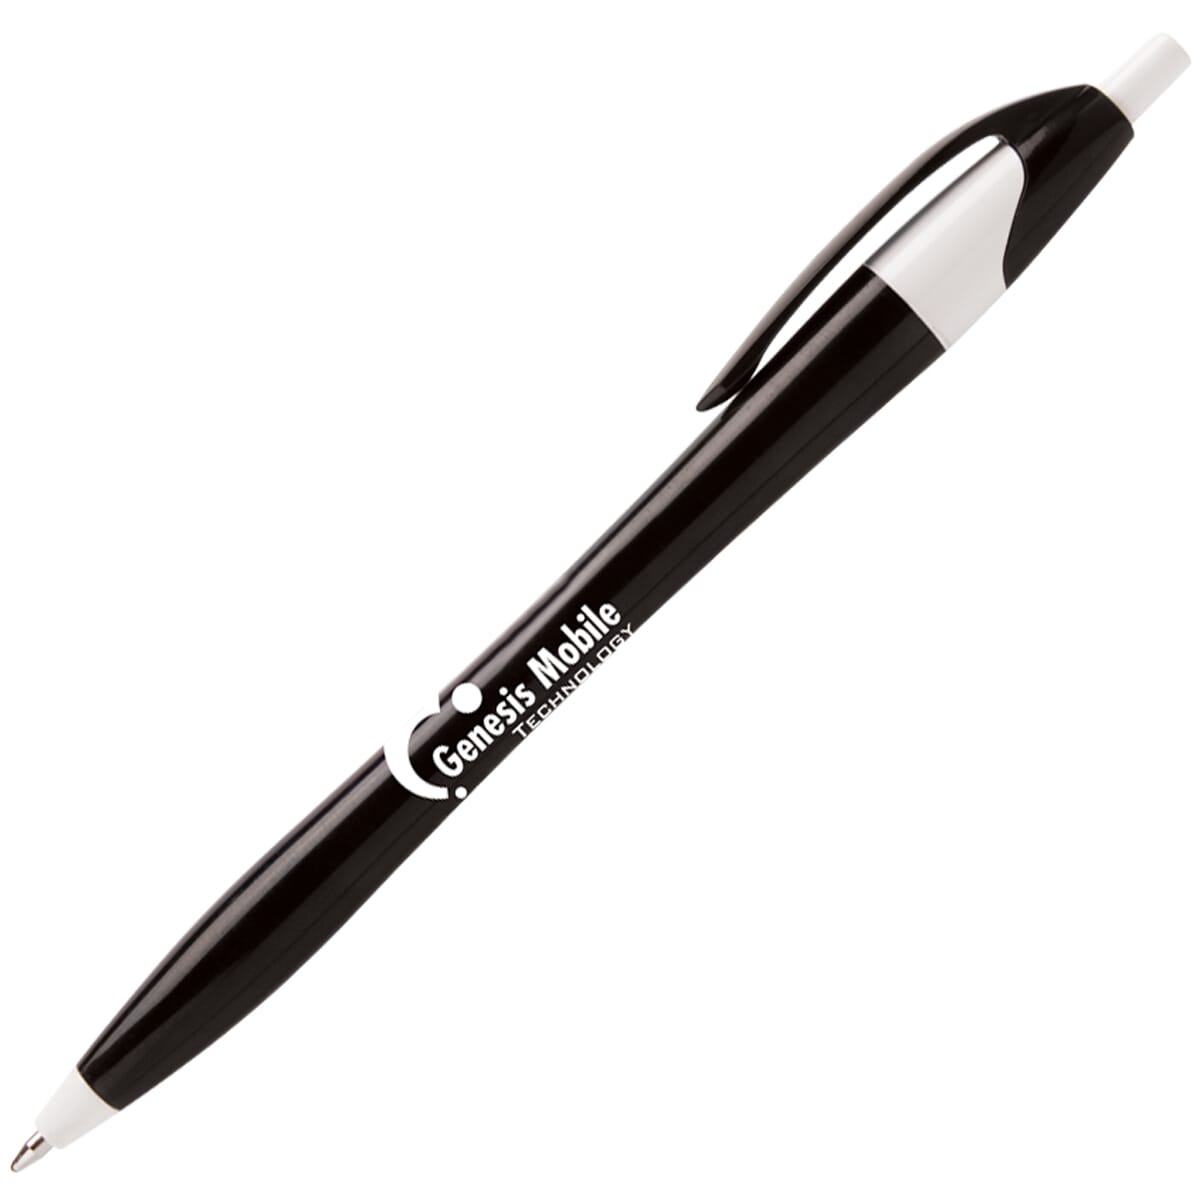 Inexpensive quality pen with logo